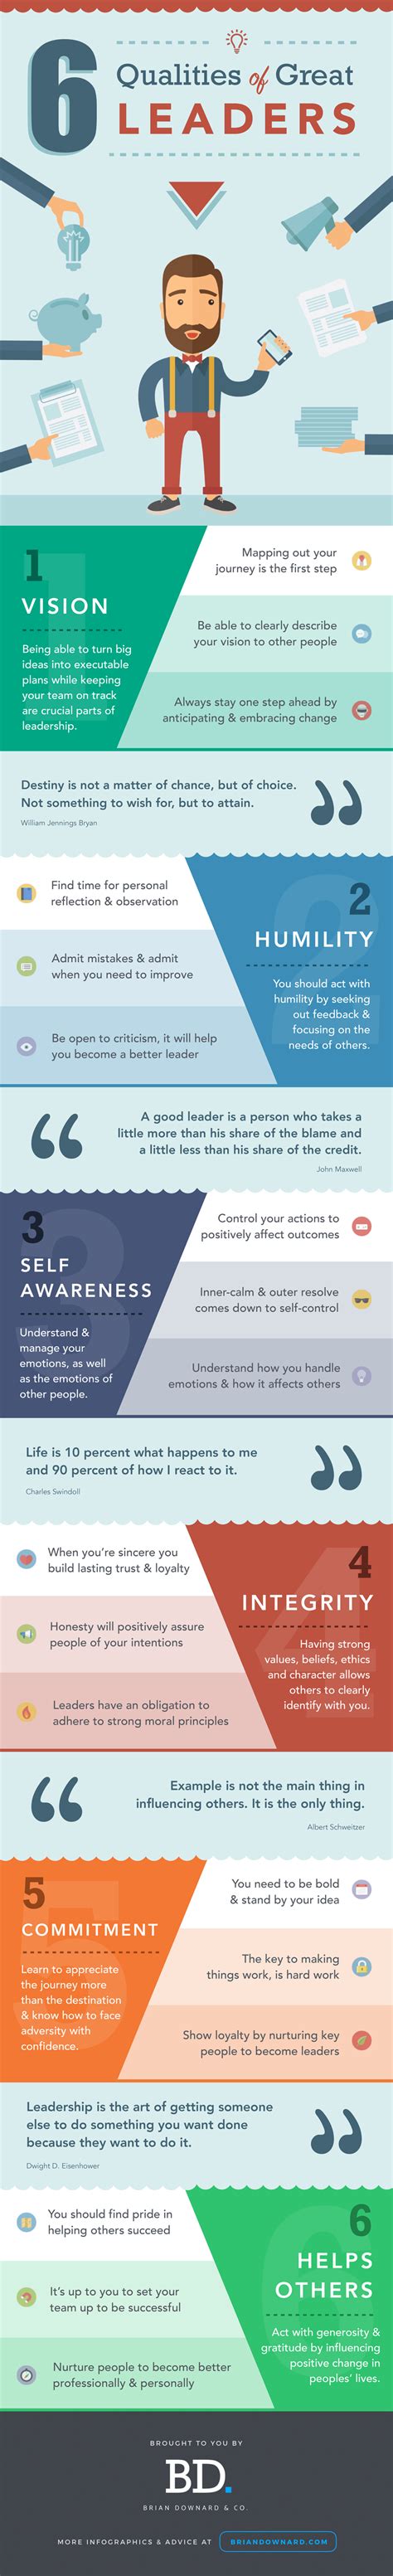 6 most important qualities of great leaders infographic